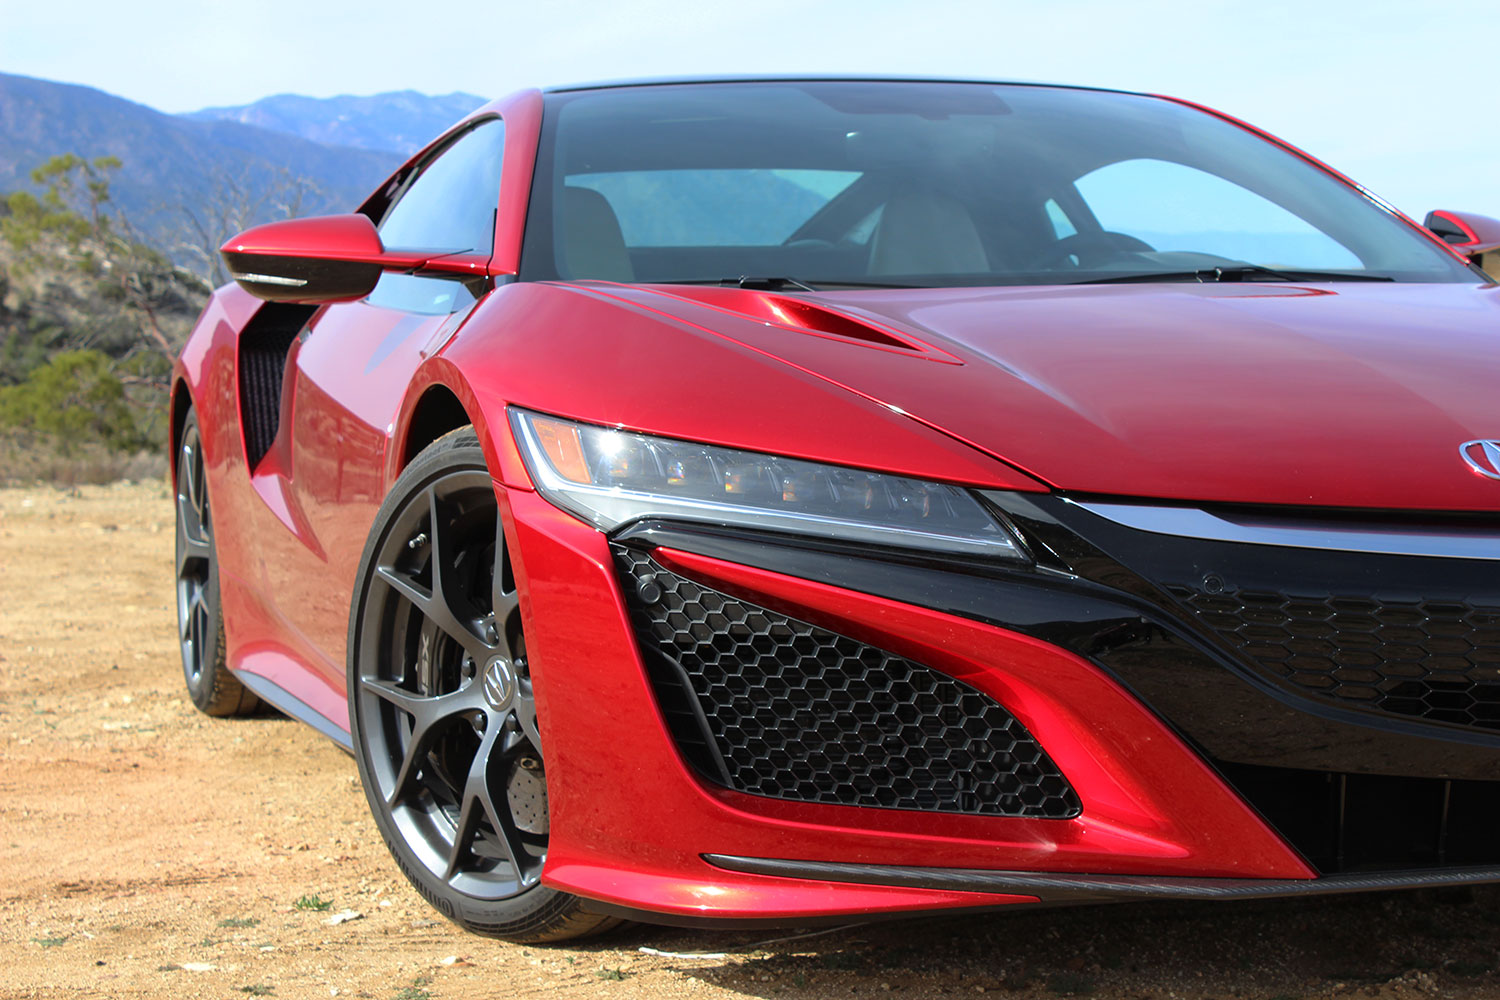 2017 Acura NSX First Drive